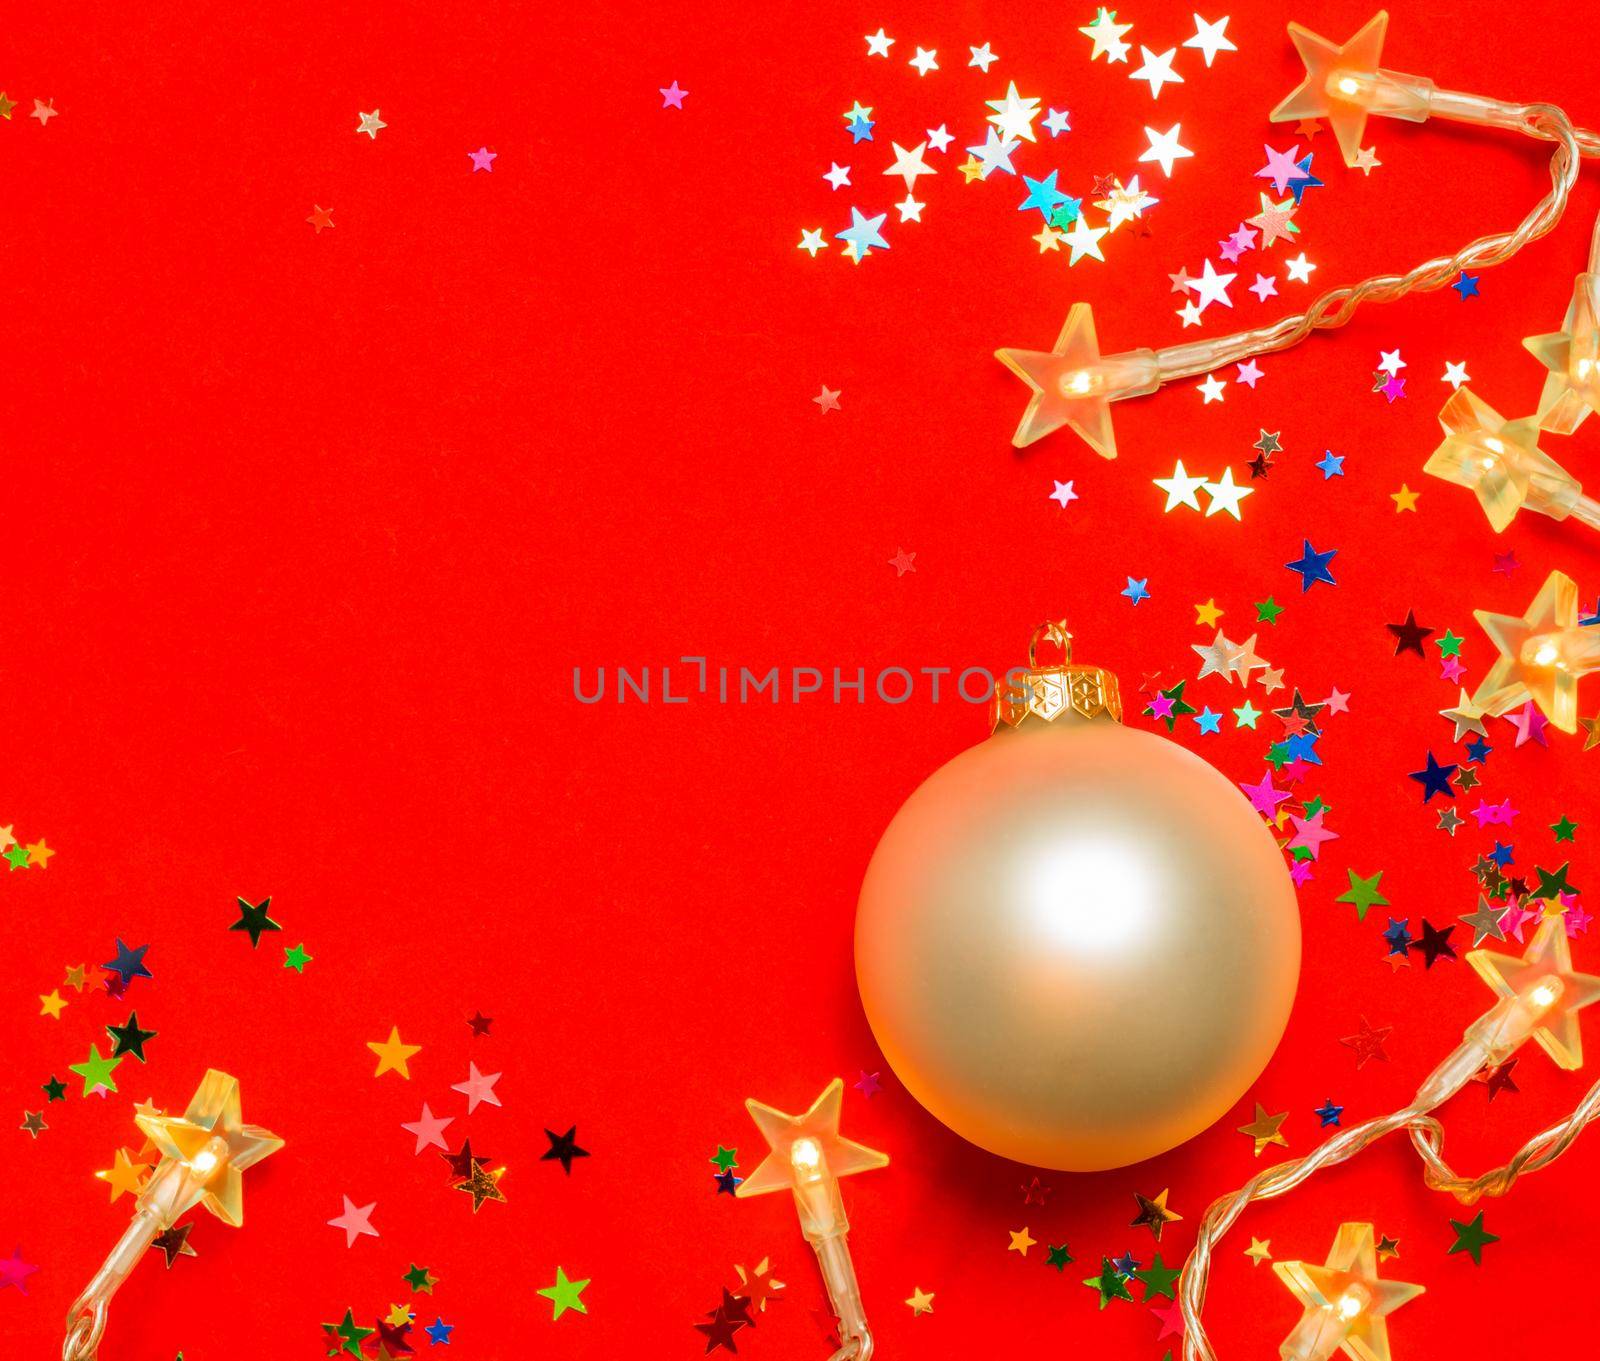 Christmas bauble with star-shaped lights and confetti on red background